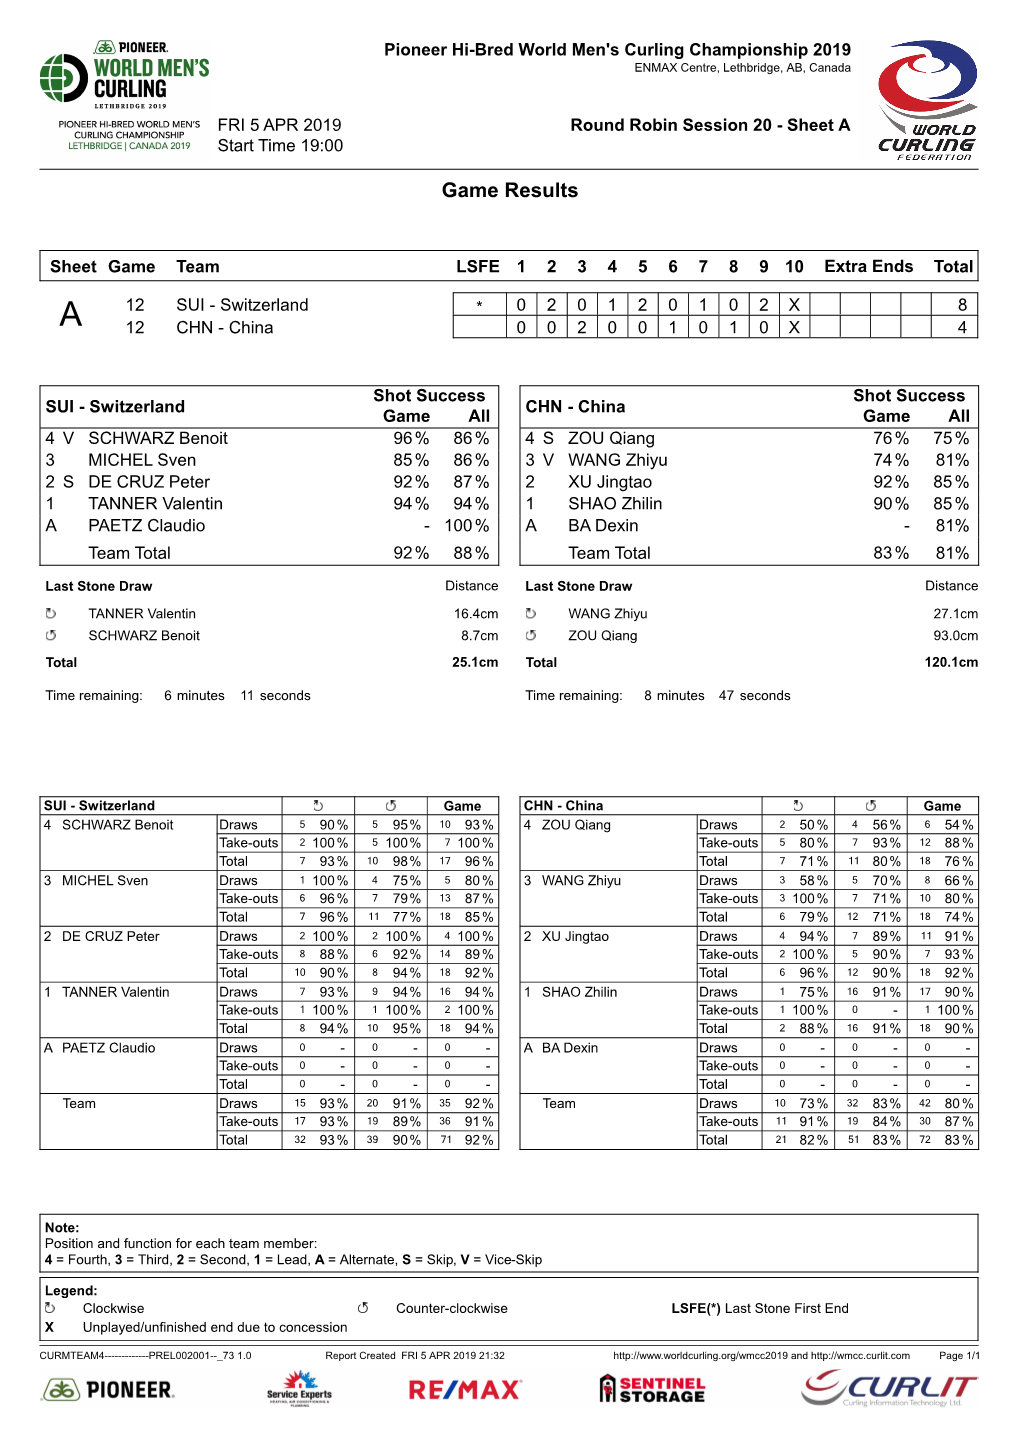 Game Results SUI-CHN